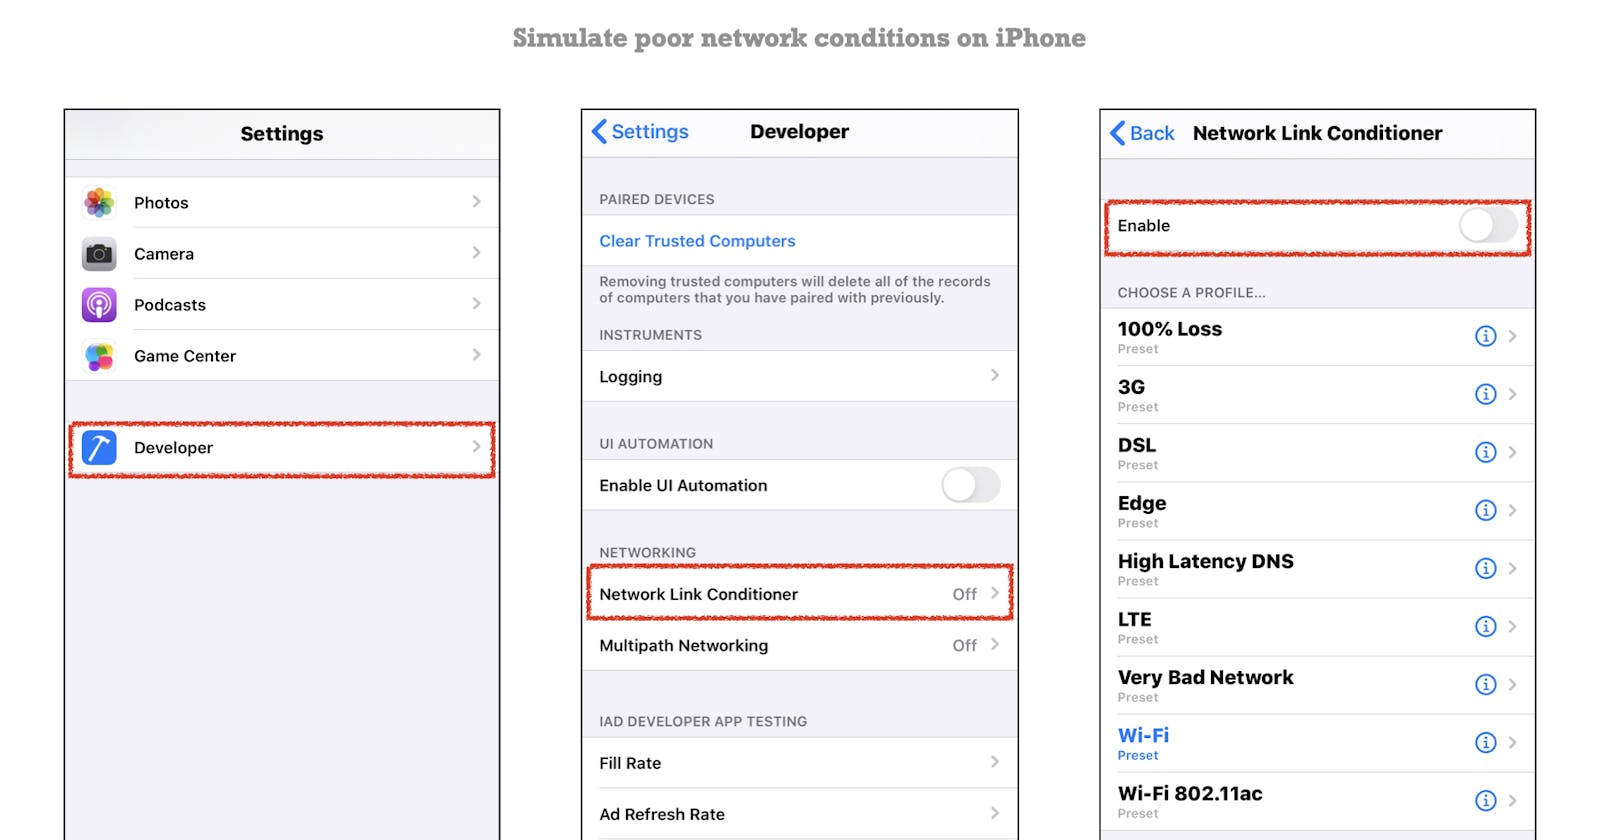 How to simulate poor network conditions on iOS Simulator and iPhone